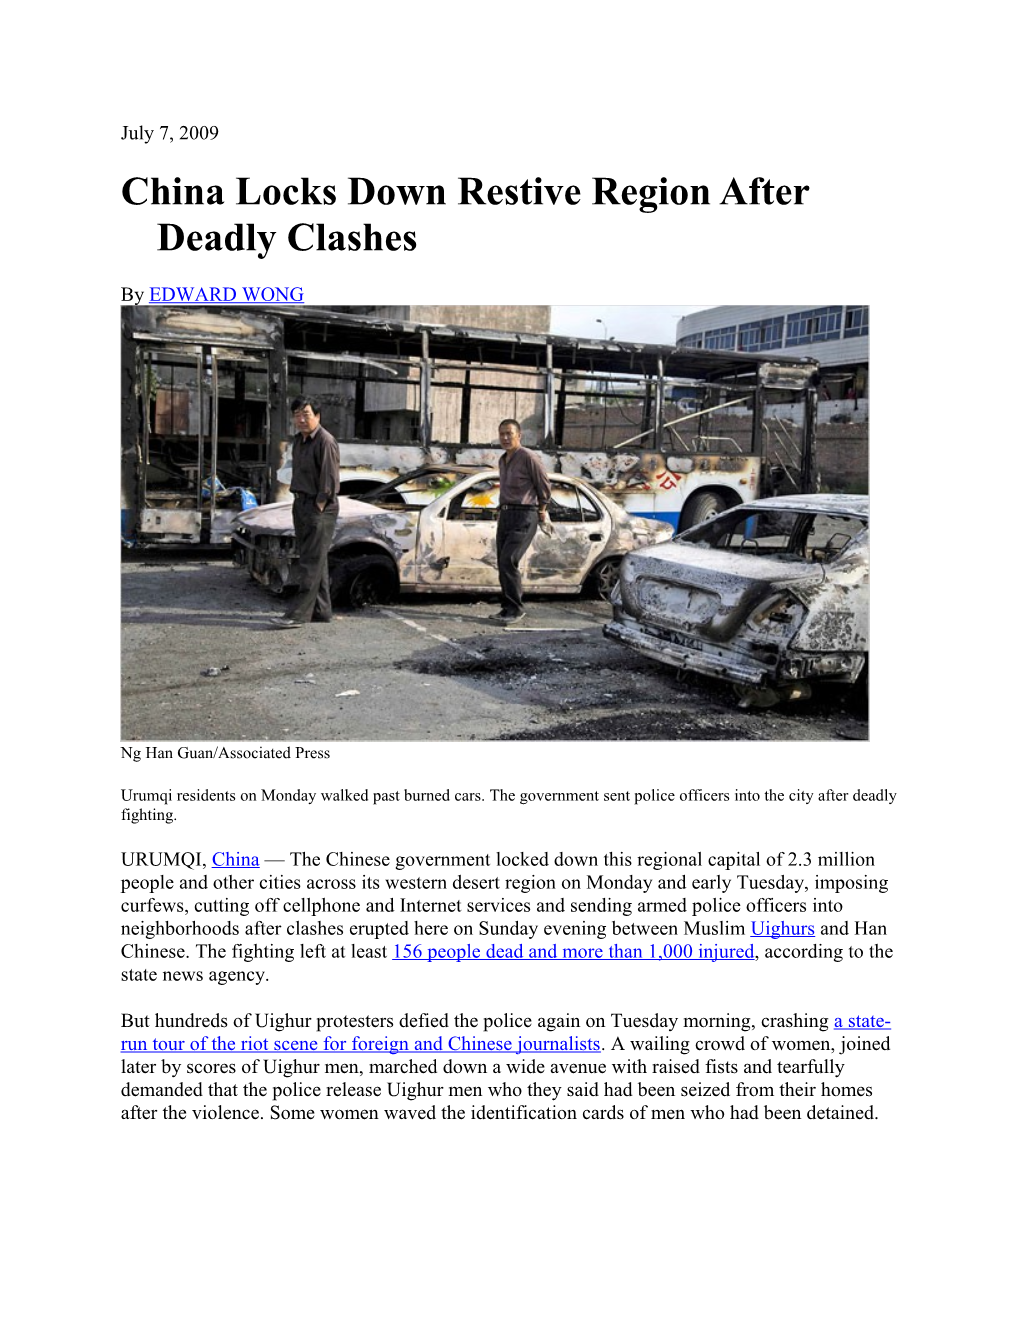 China Locks Down Restive Region After Deadly Clashes